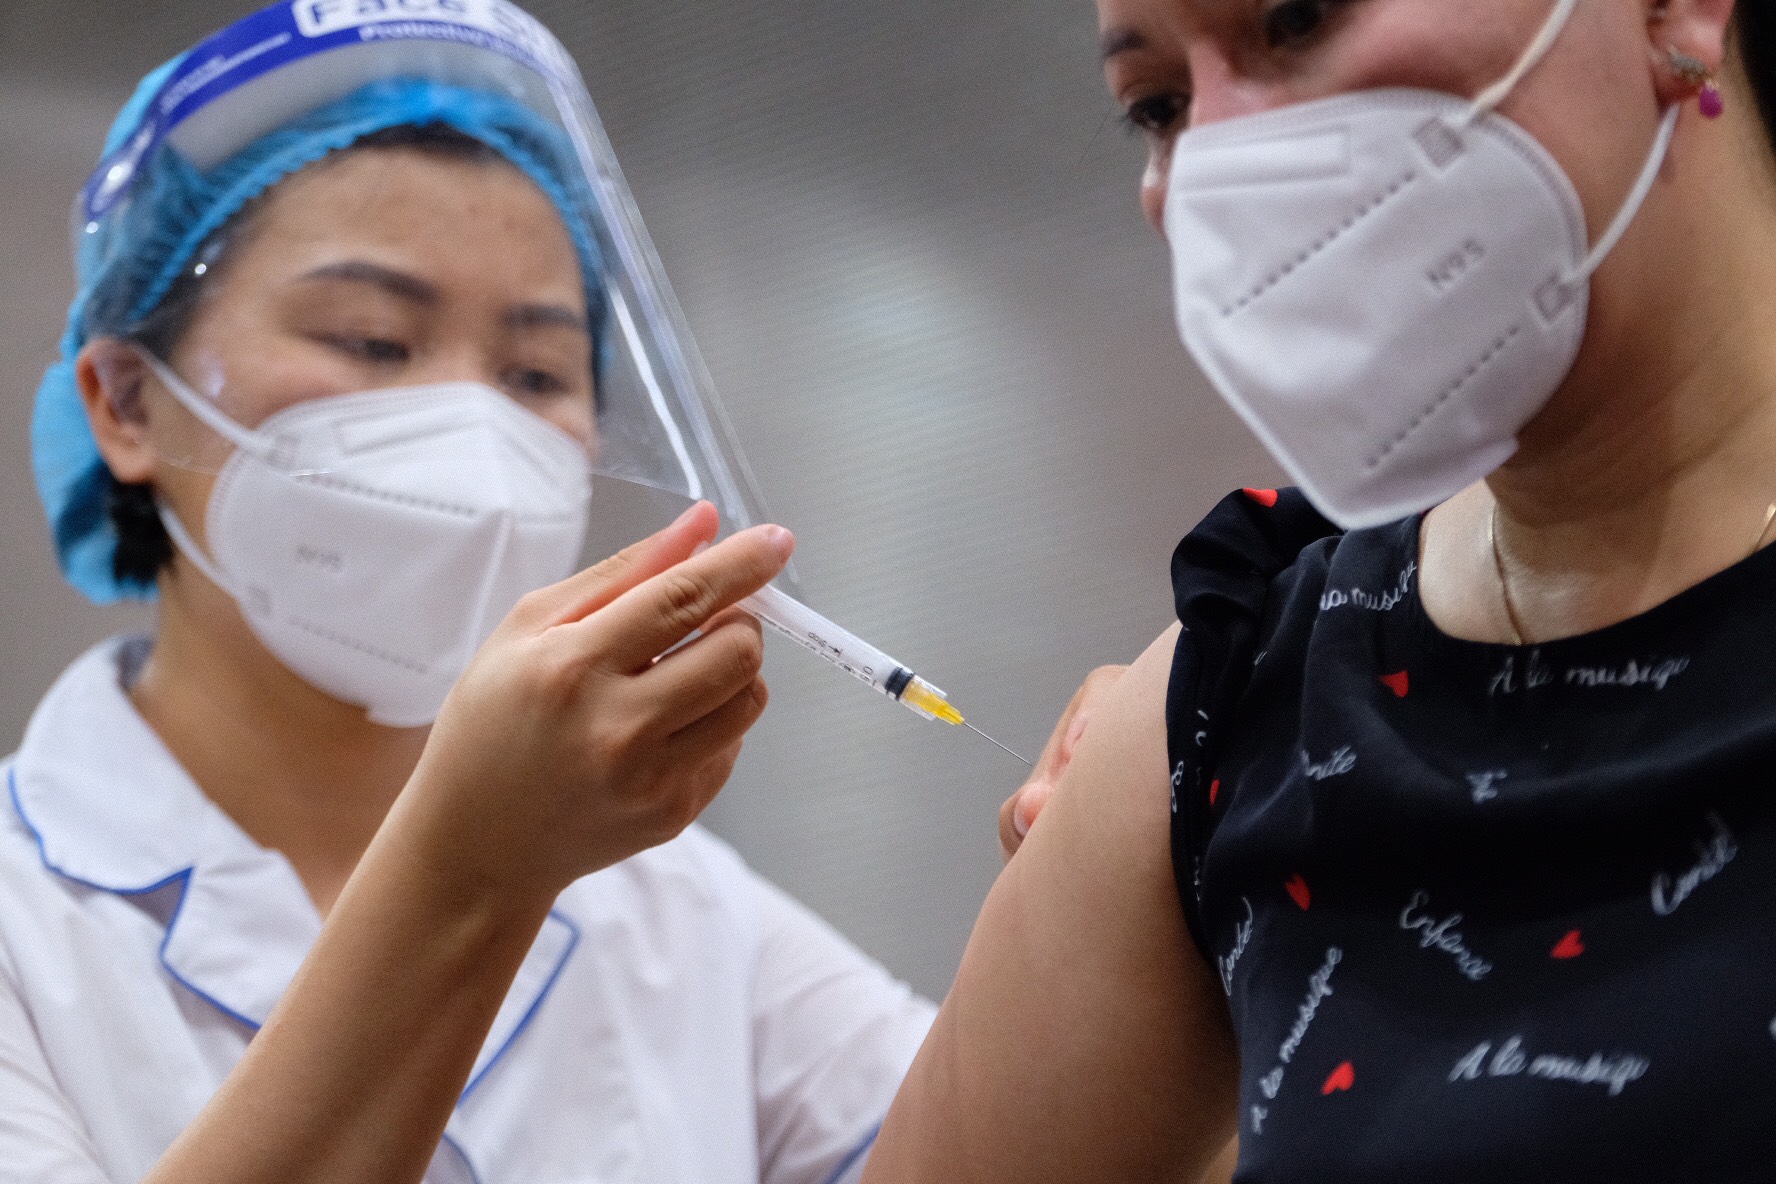 Vietnamese woman dies of anaphylaxis after second COVID-19 vaccine dose